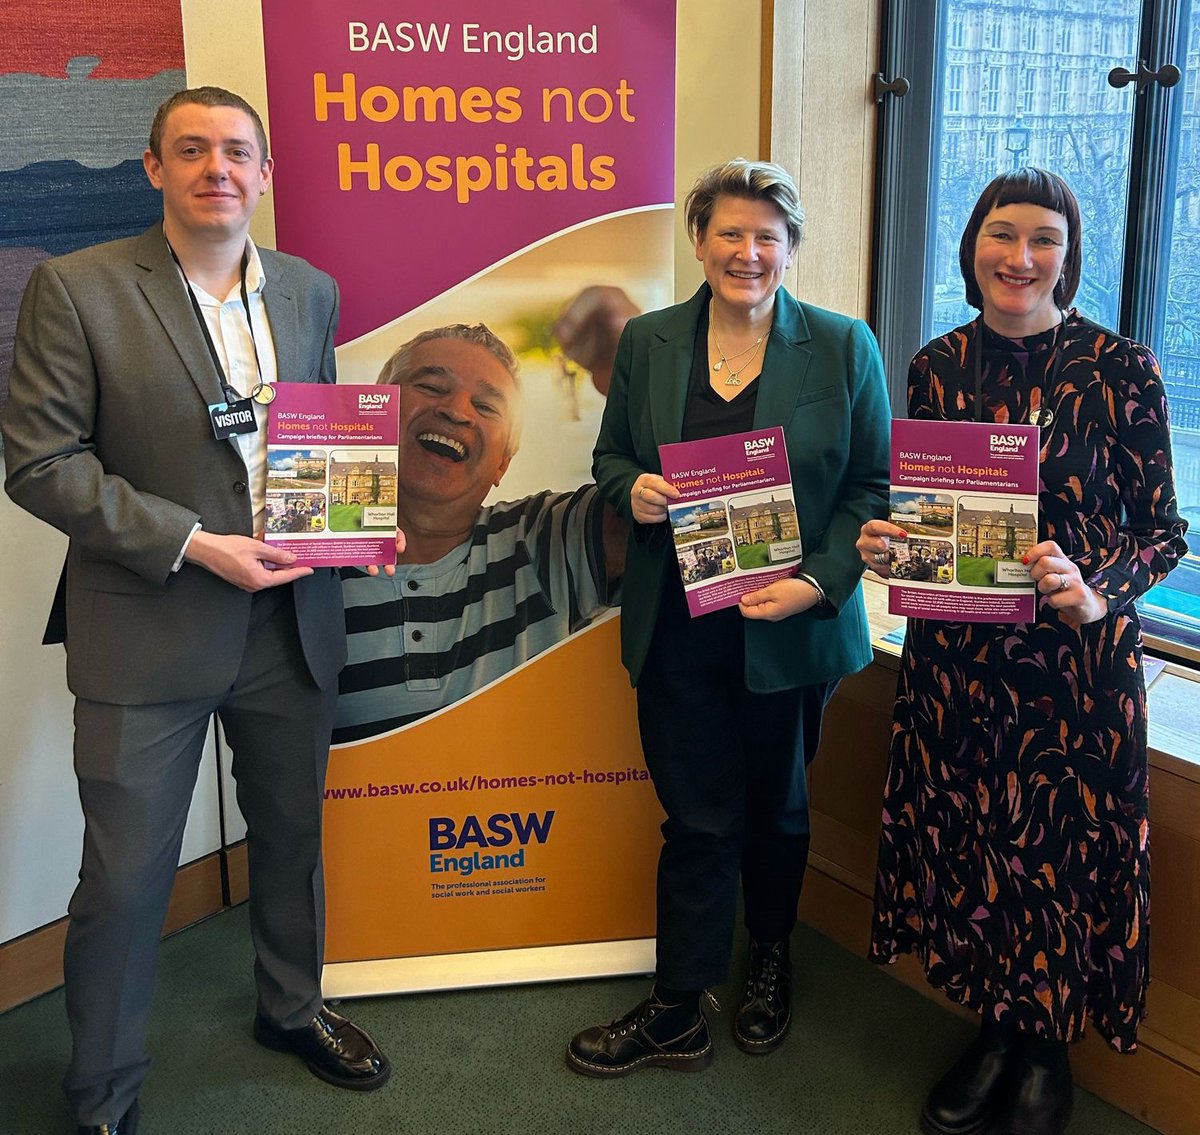 More than 2,000 autistic people & people with learning disabilities are being held in hospitals, often away from their communities & in isolation for several years. @BASW_UK's #HomesNotHospitals campaign aims to change that. tinyurl.com/bdfu3kj7